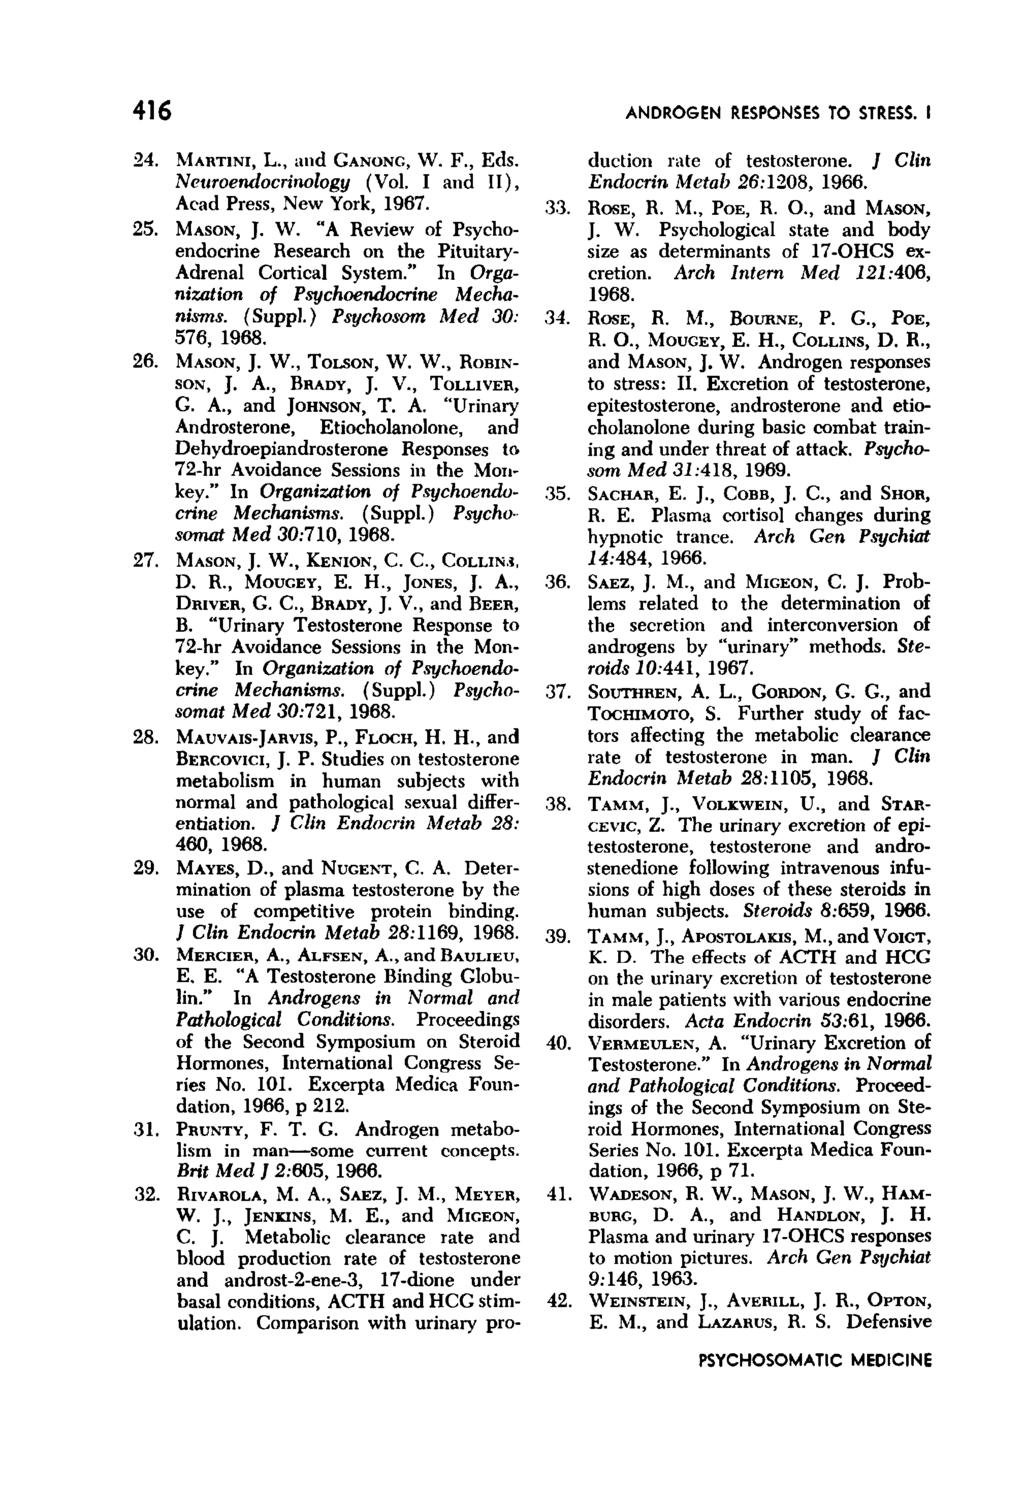 416 ANDROGEN RESPONSES TO STRESS. I 24. MARTINI, L., and GANONG, W. F., Eds. Neuroendocrinology (Vol. I and II), Acad Press, New York, 1967. 25. MASON, J. W. "A Review of Psychoendocrine Research on the Pituitary- Adrenal Cortical System.